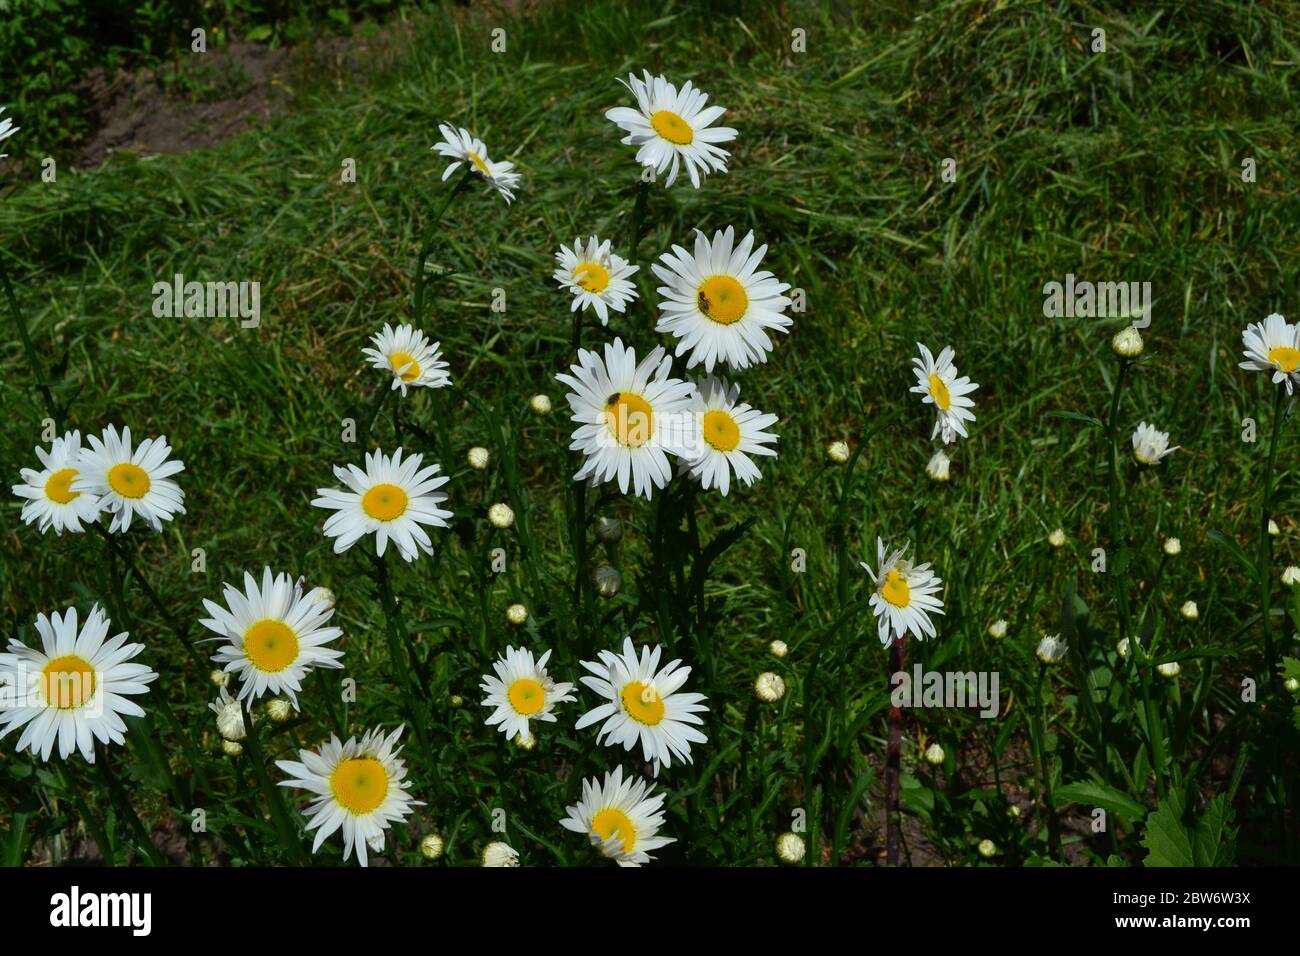 White flowers. Green leaves, bushes. Gardening Home garden, flower bed. Daisy flower, chamomile. Matricaria Perennial flowering plant of the Asteracea Stock Photo